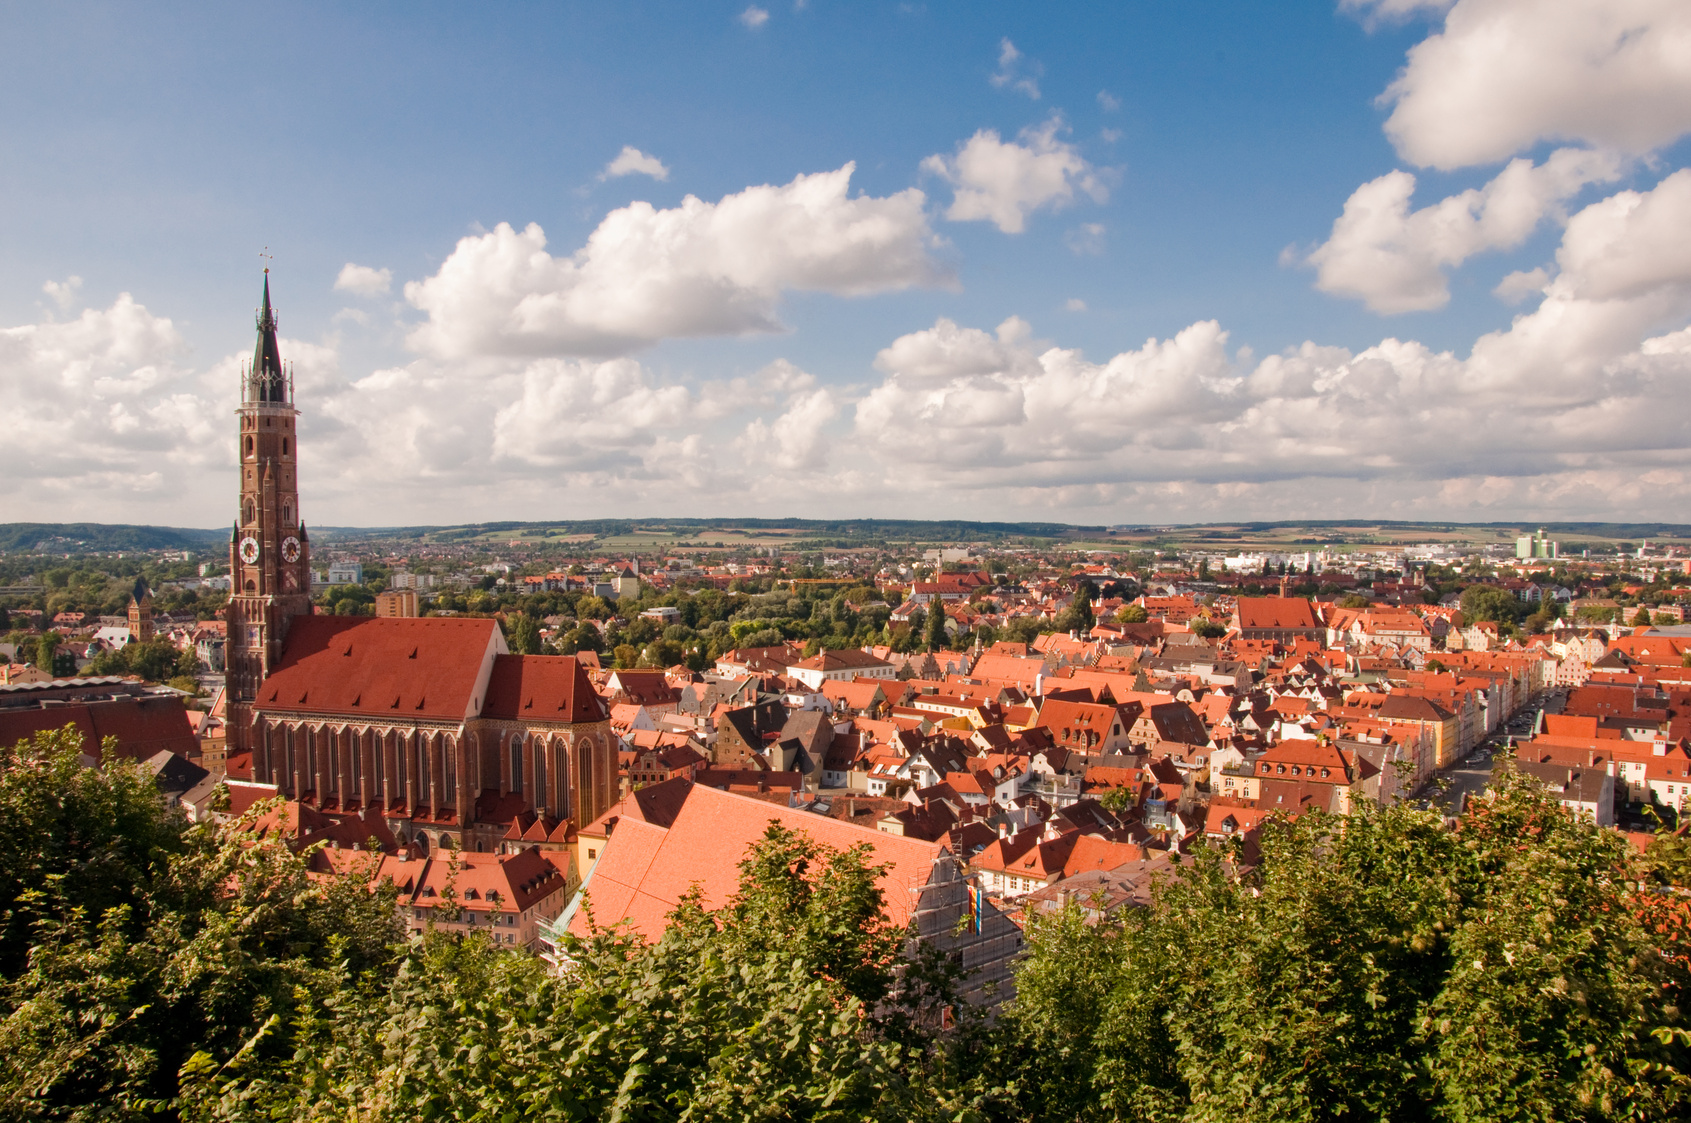 Experience leisure time in Landshut anew